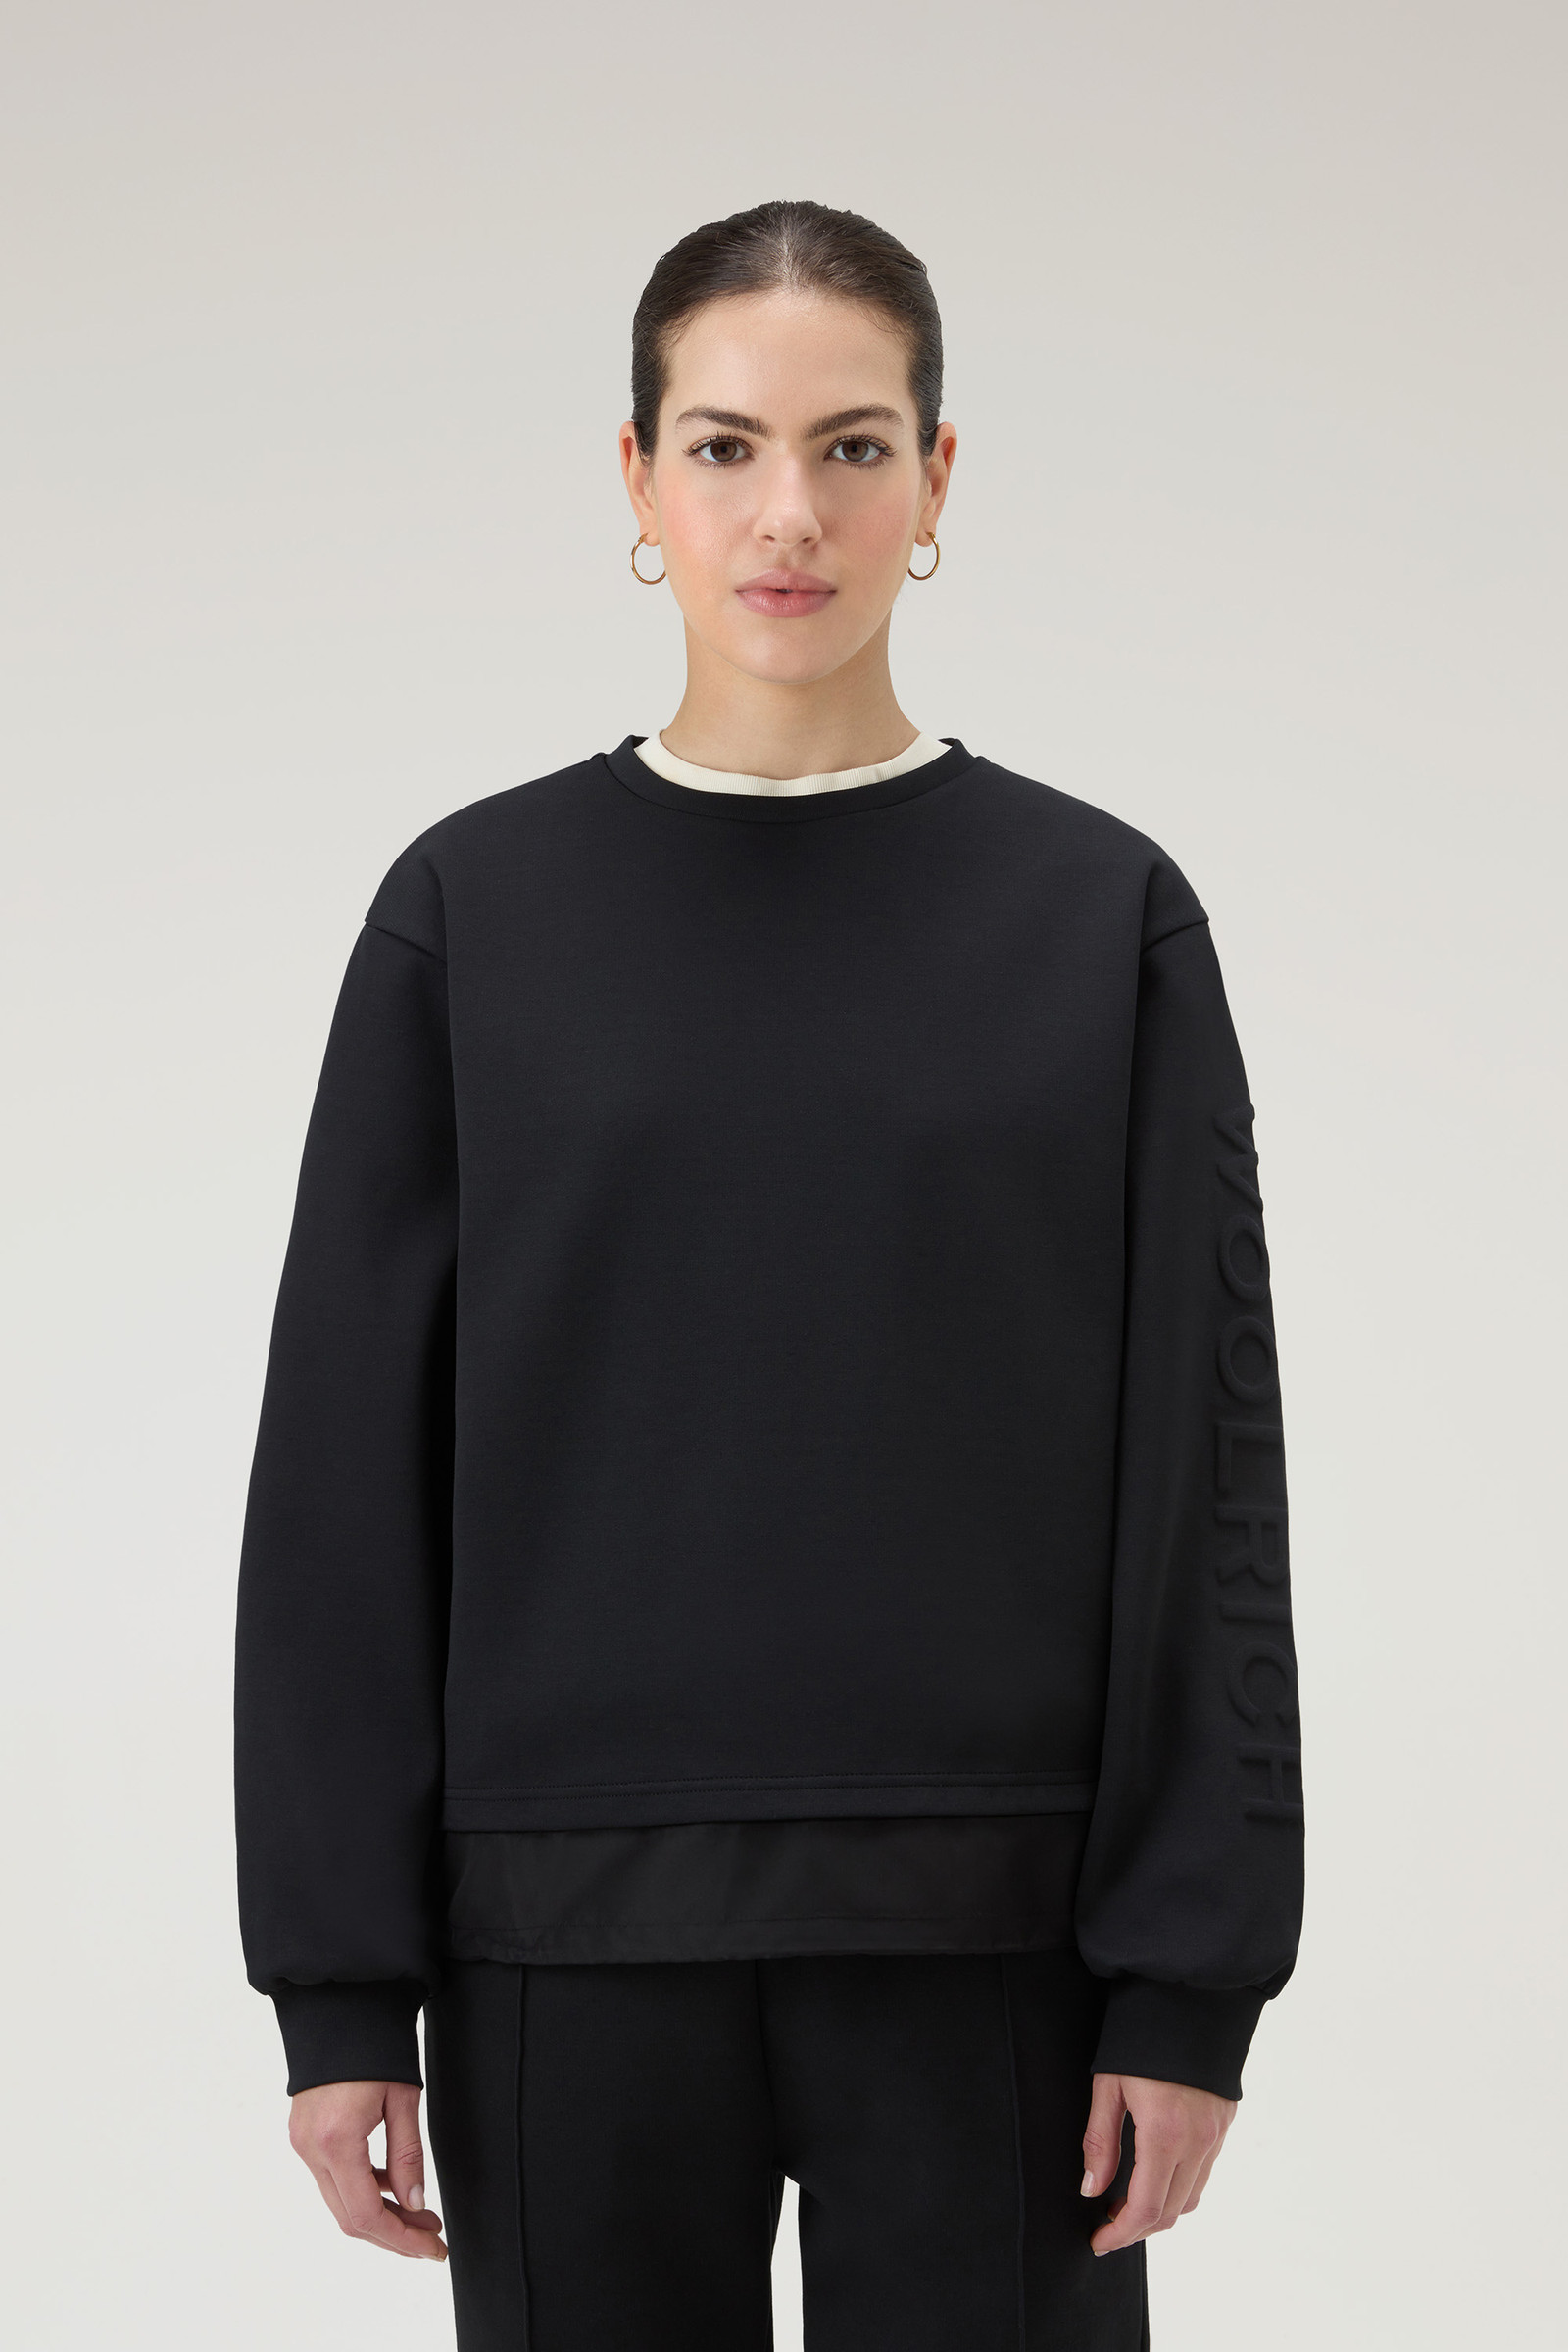 Women's Crewneck in Mixed Cotton with Nylon Details Black | Woolrich USA